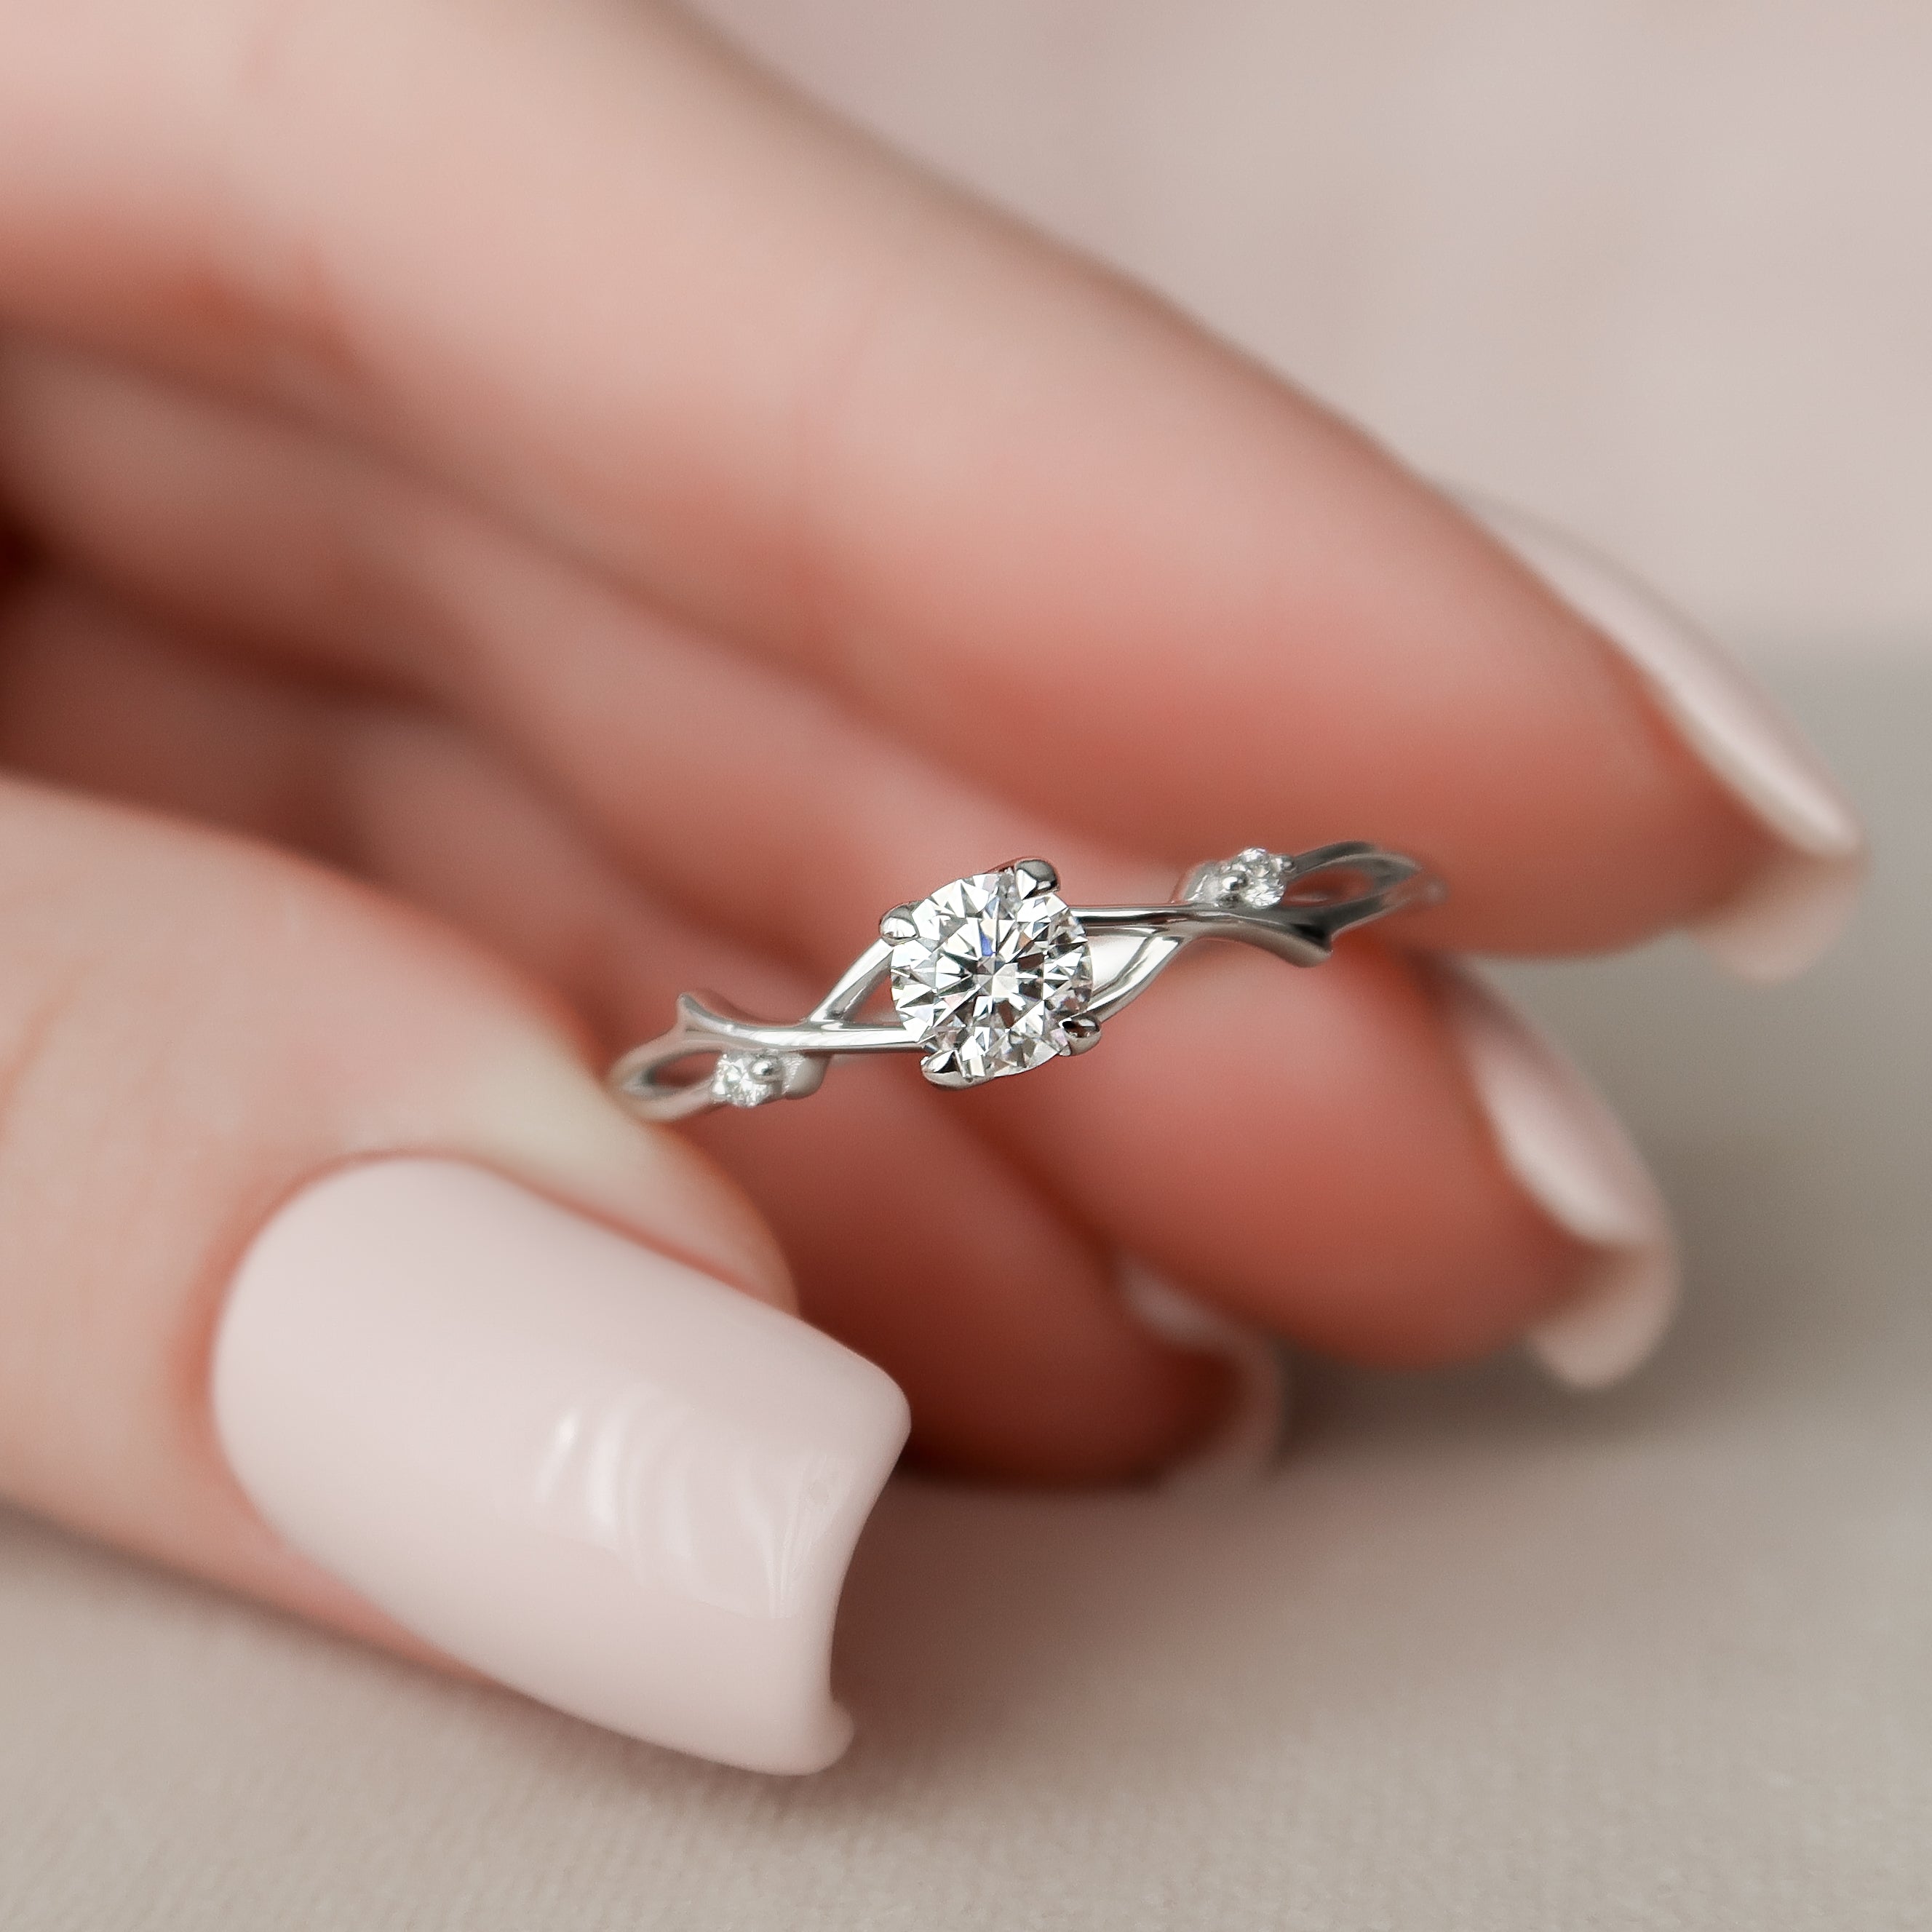 Twig and Maple Leaf Engagement Ring White Gold and Diamond - Doron Merav